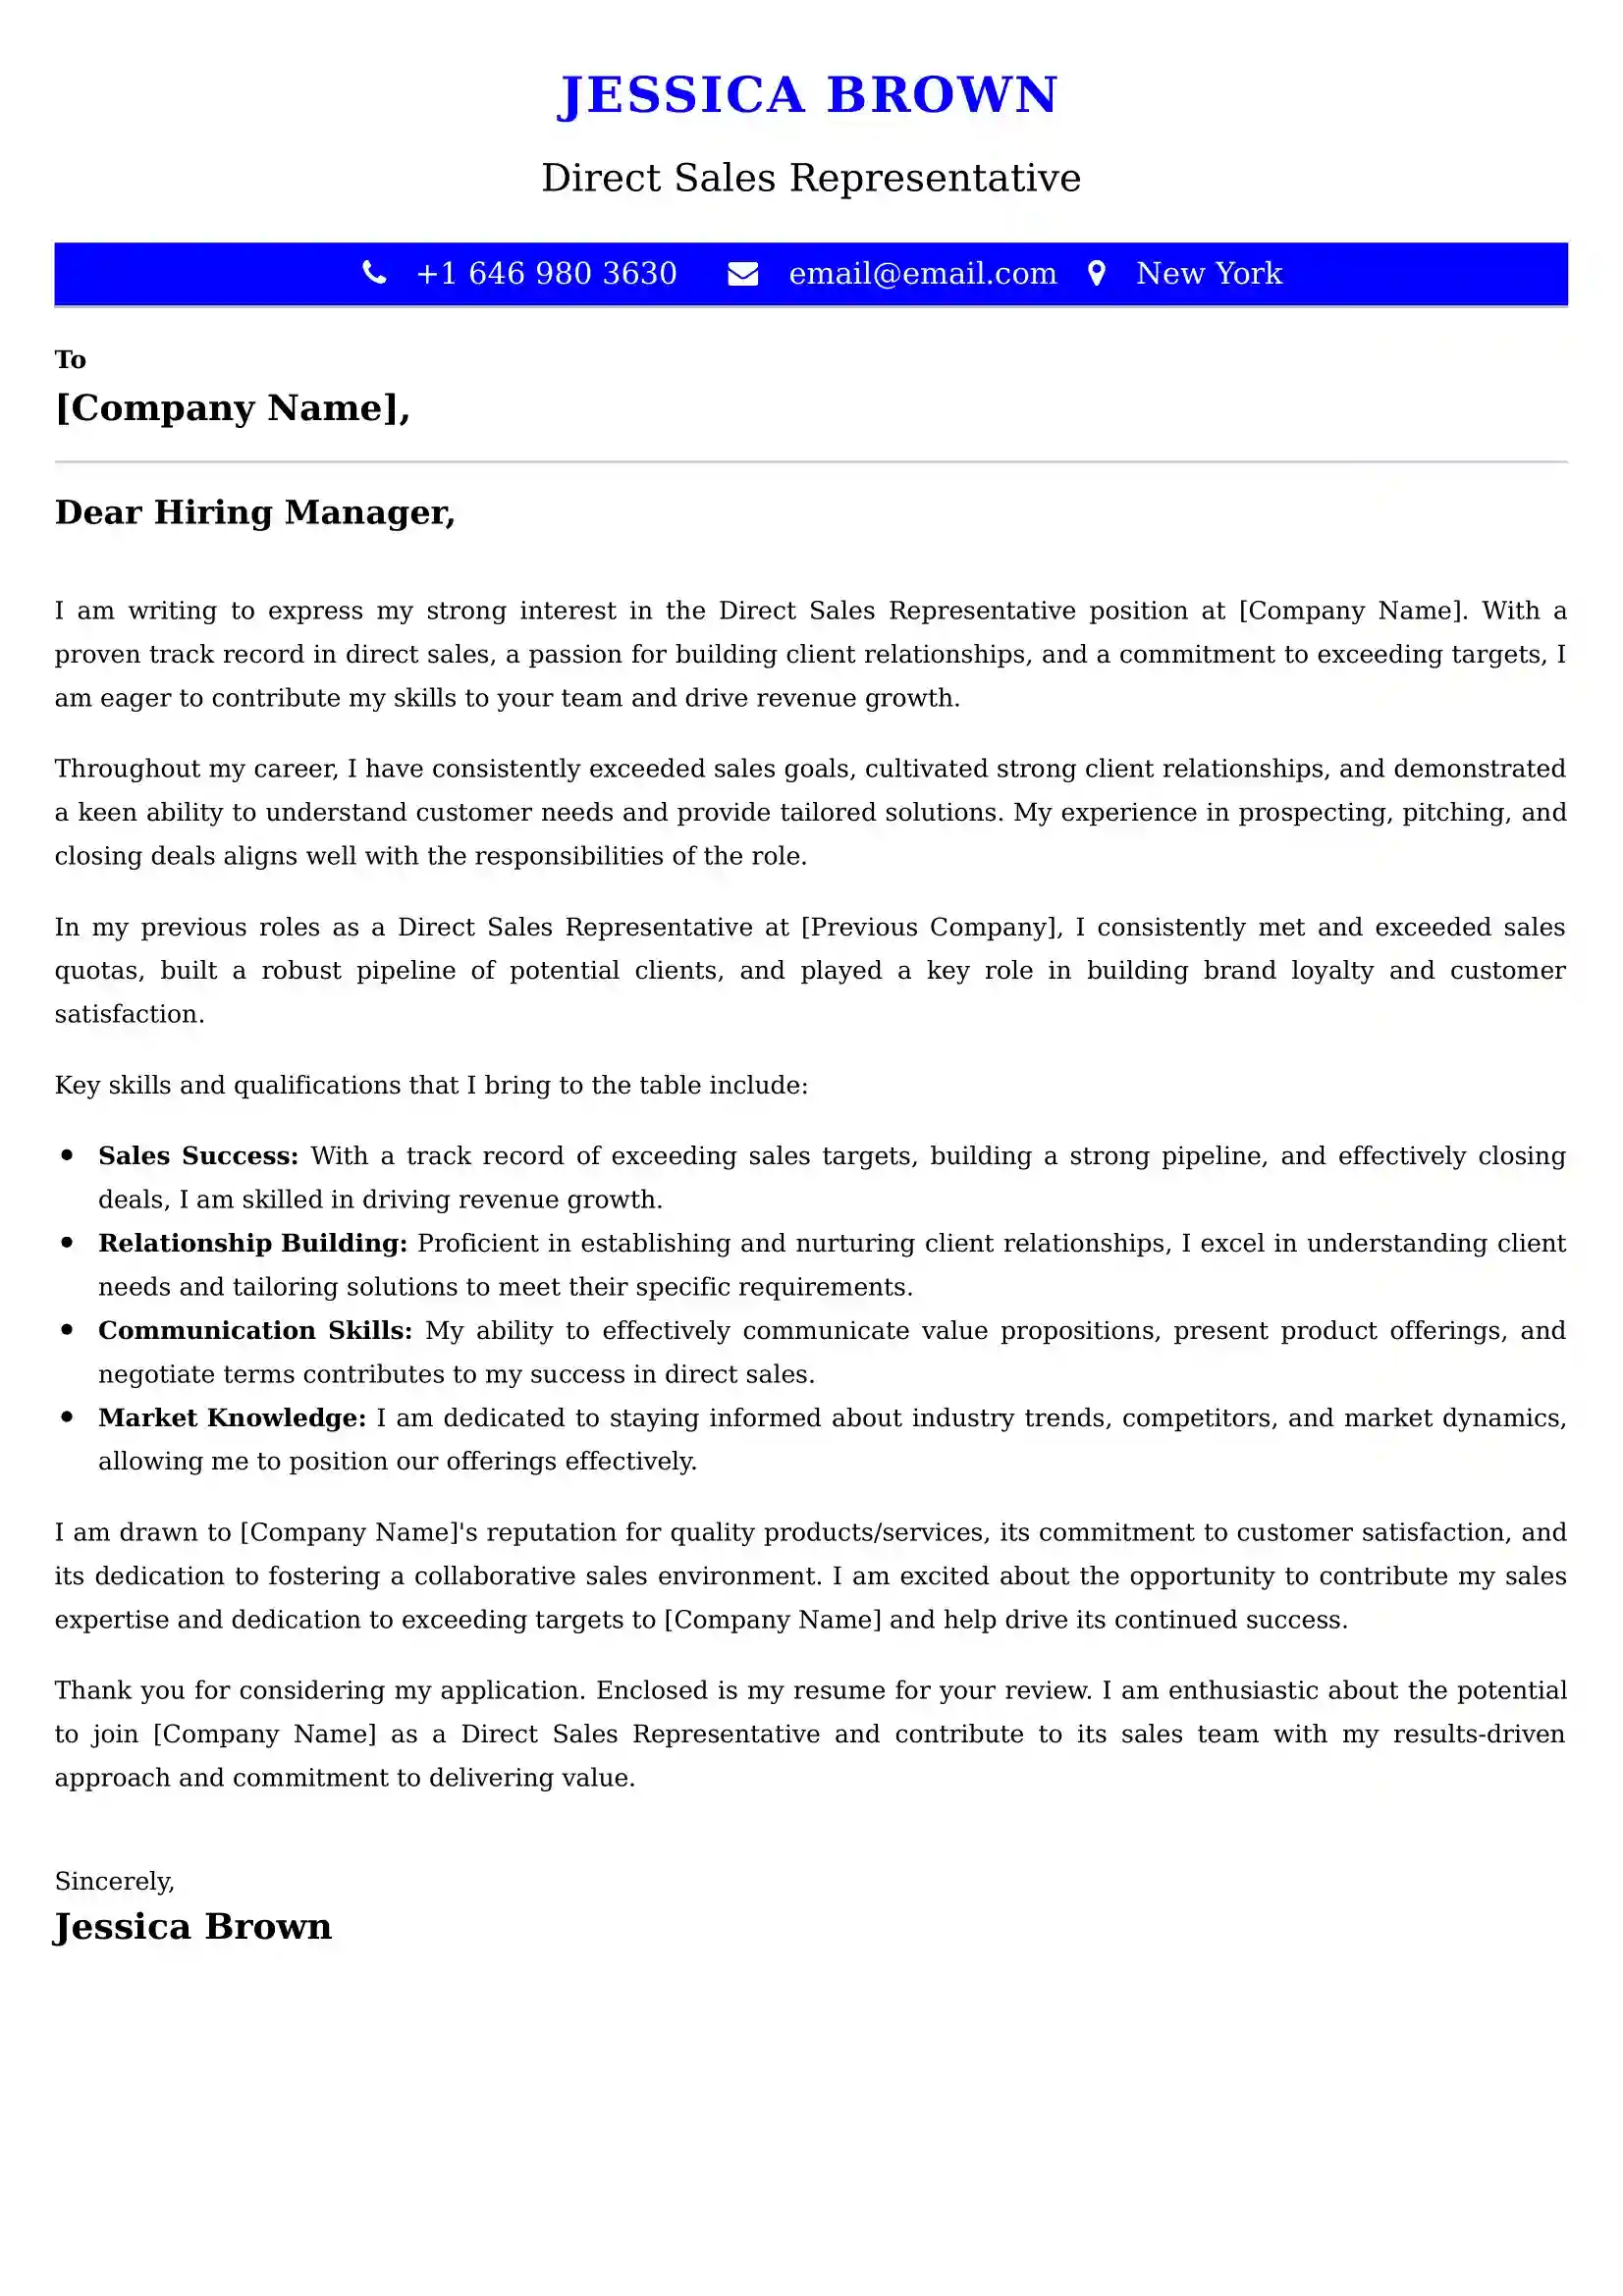 Direct Sales Representative Cover Letter Examples - Latest UK Format